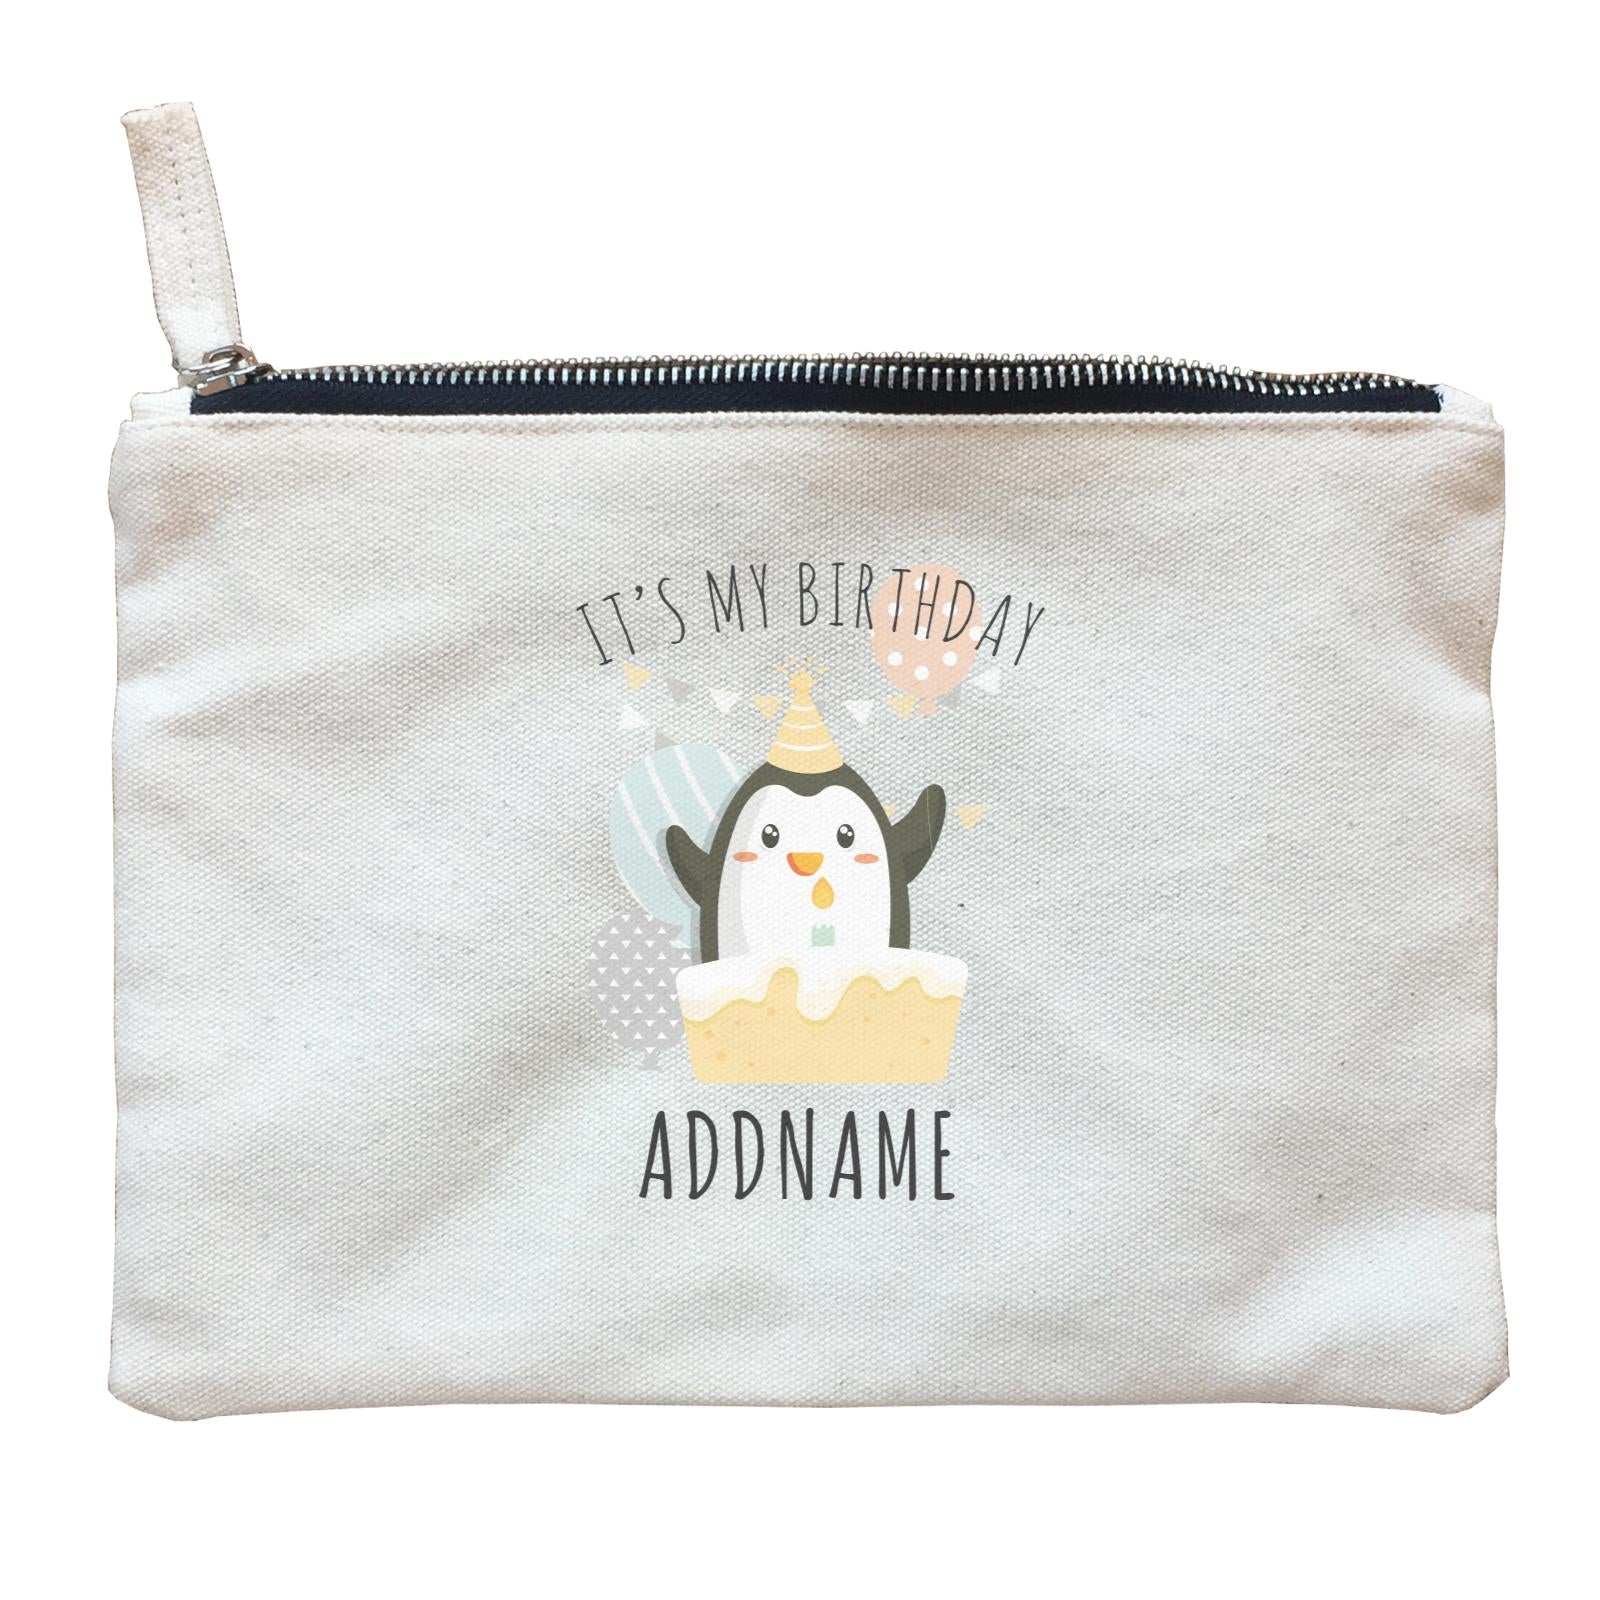 Birthday Cute Penguin And Cake It's My Birthday Addname Zipper Pouch